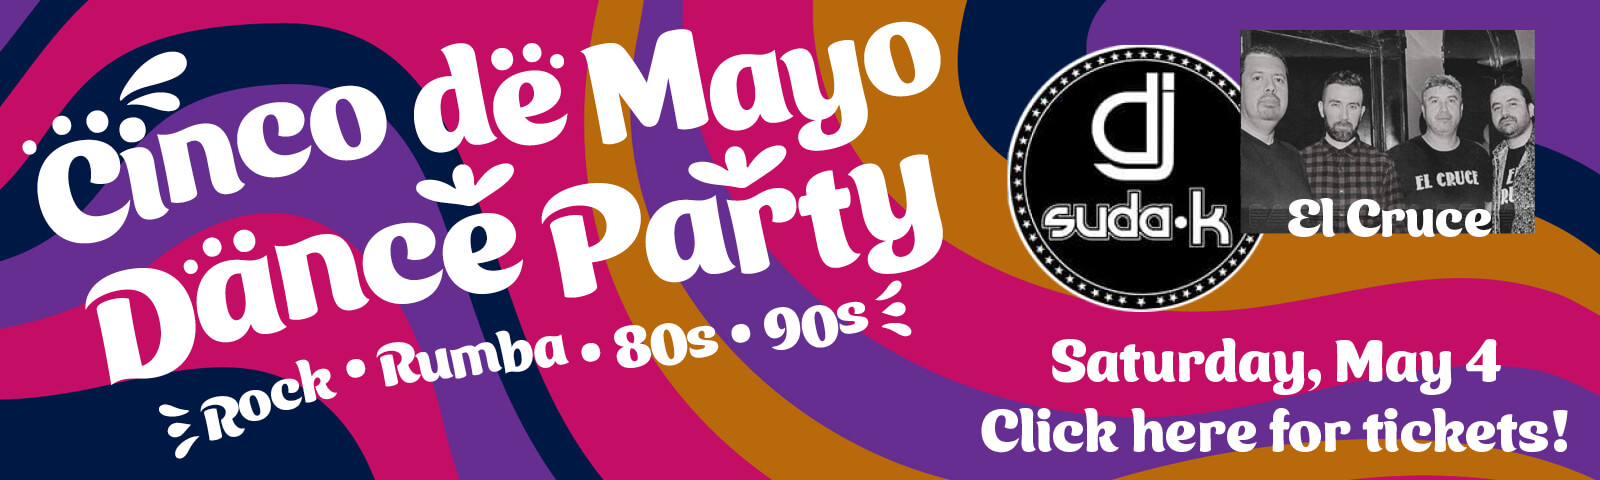 Cinco de Mayo Dance Party: Rock, rumba, 80s, 90s! Saturday, May 4. Click here for tickets!